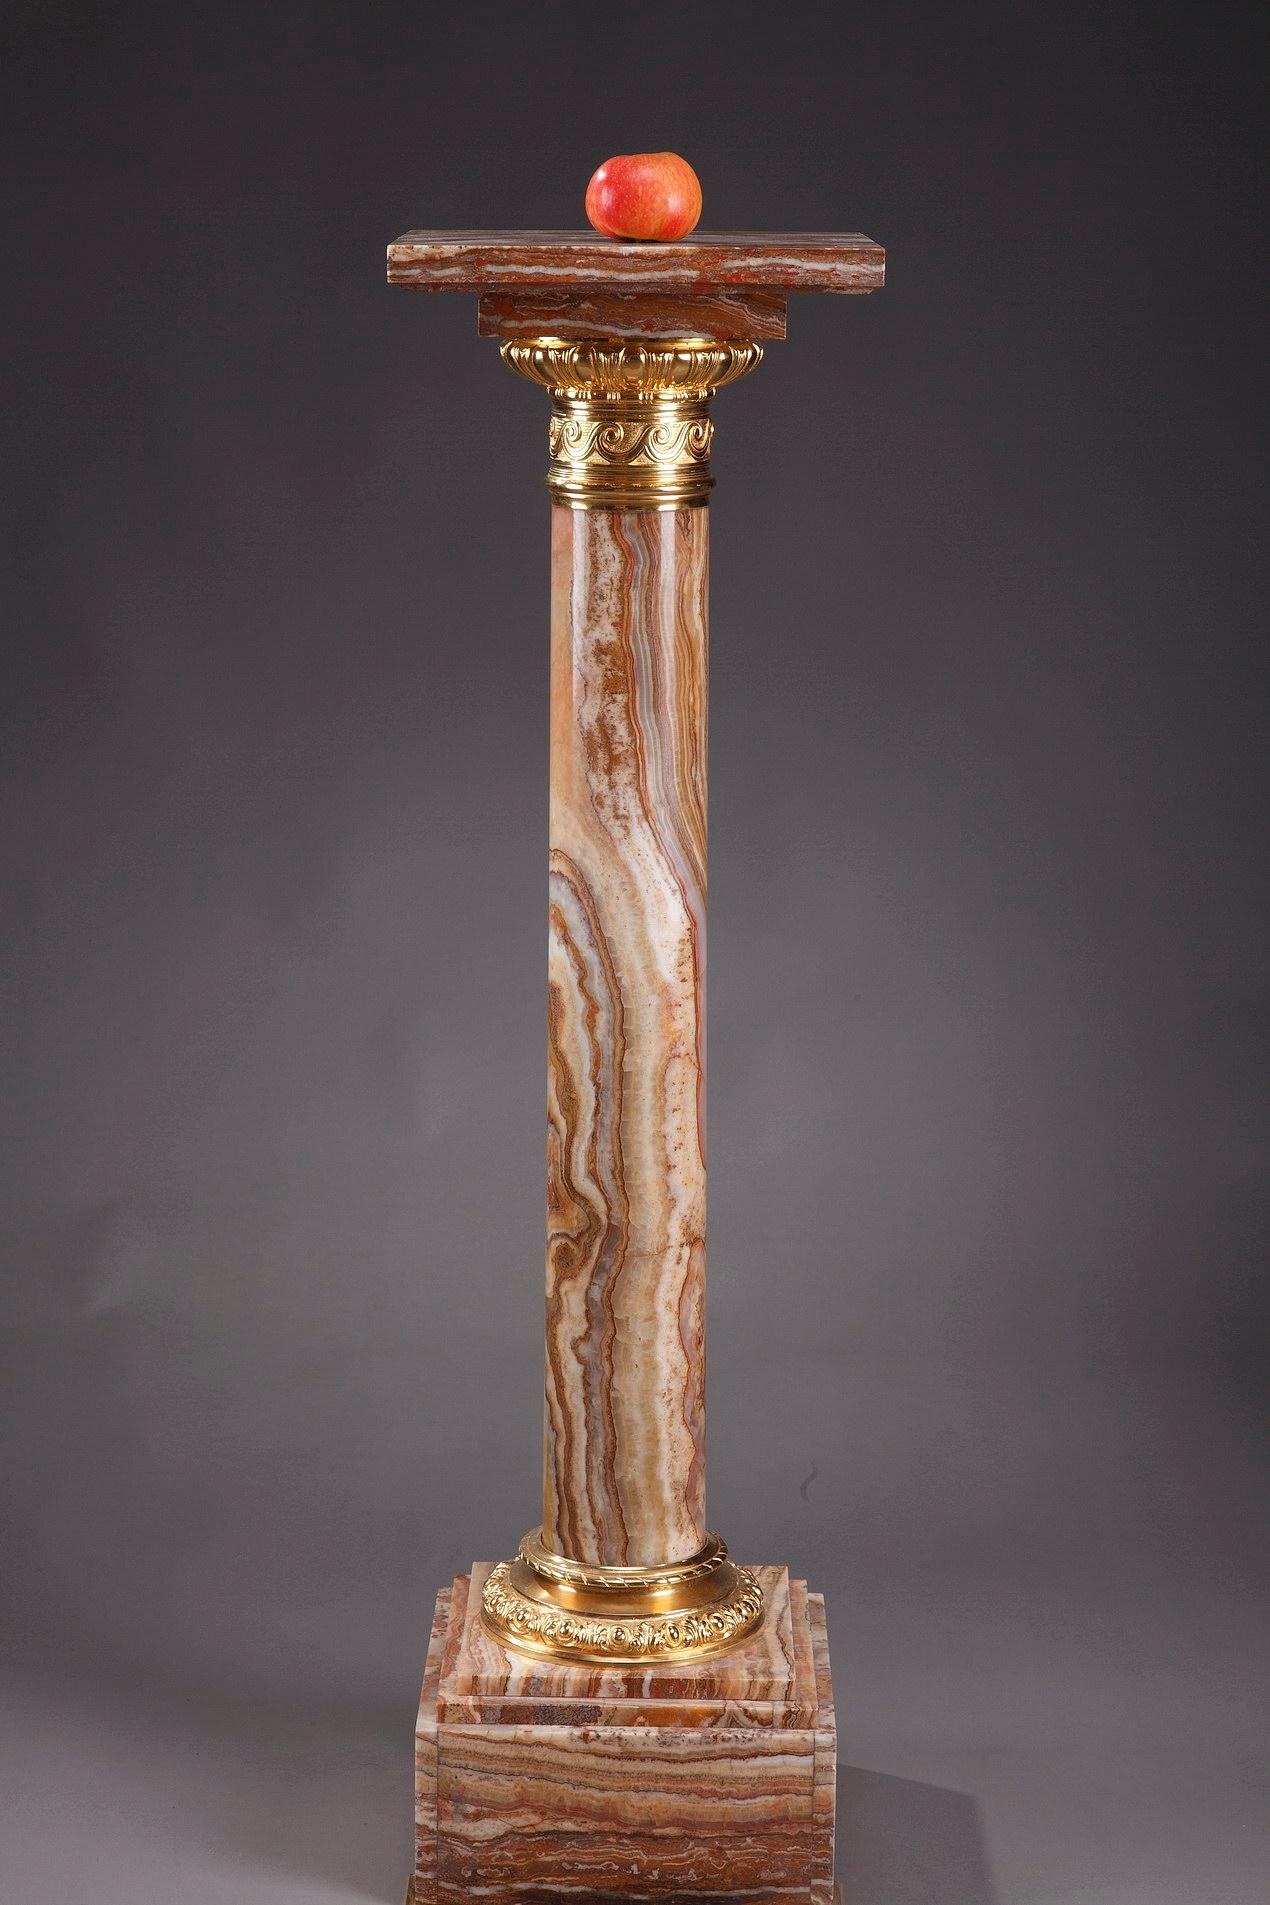 Onyx display column in a spectrum of ochre, orange and yellow tones. The top and bottom of the shaft is encircled with a ring of gilt bronze that is embellished with alternating palmettes and ova on the bottom and a frieze of waves on the top. The